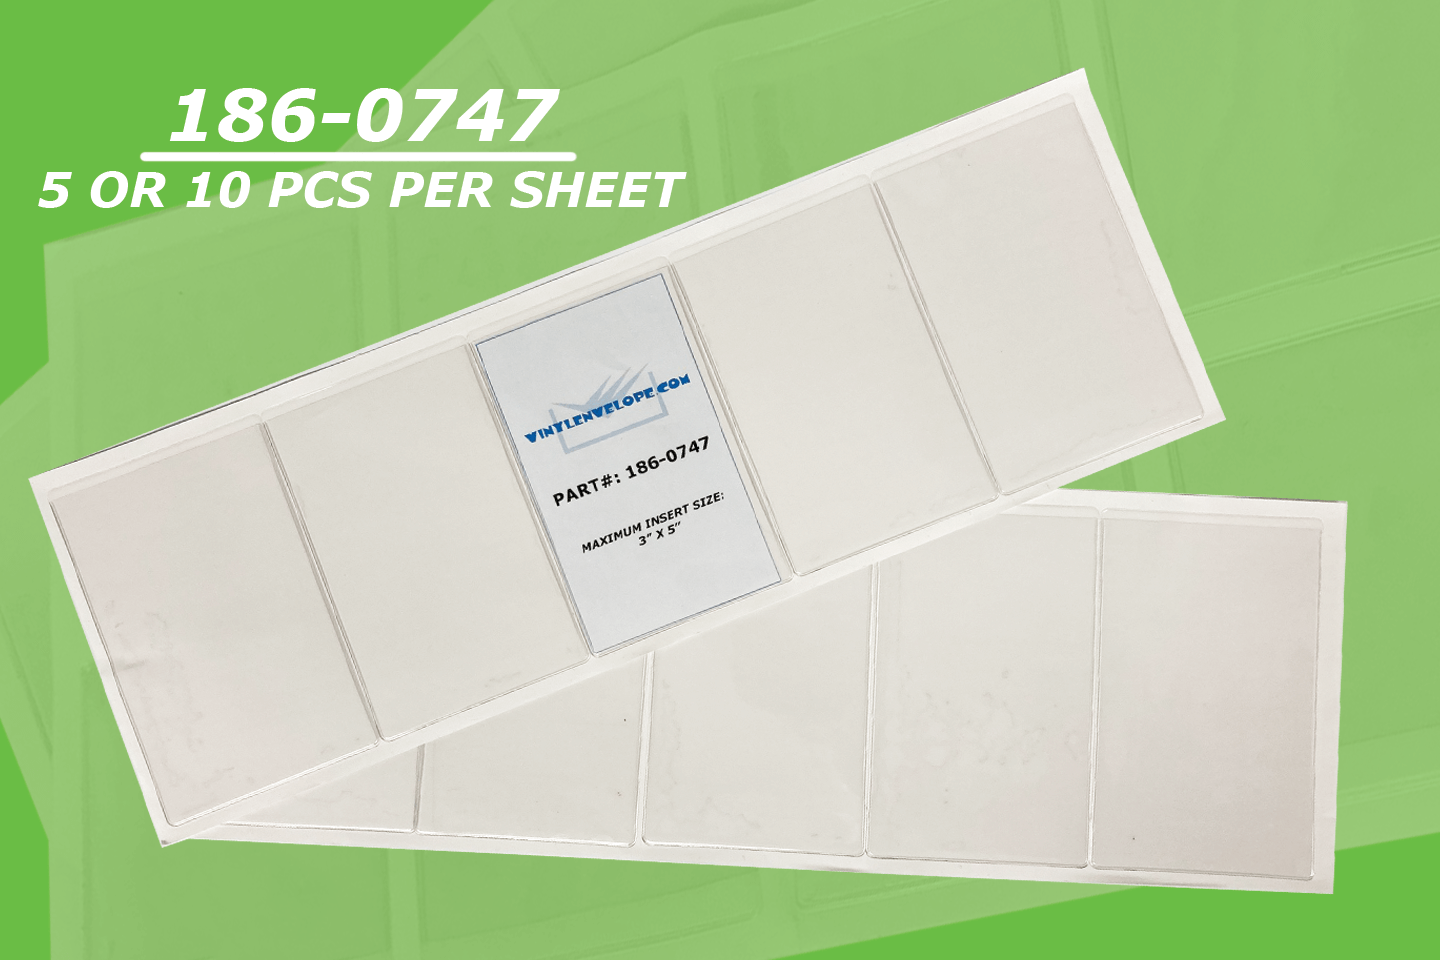 3 1/4" X 5 1/4" Adhesive Pouch